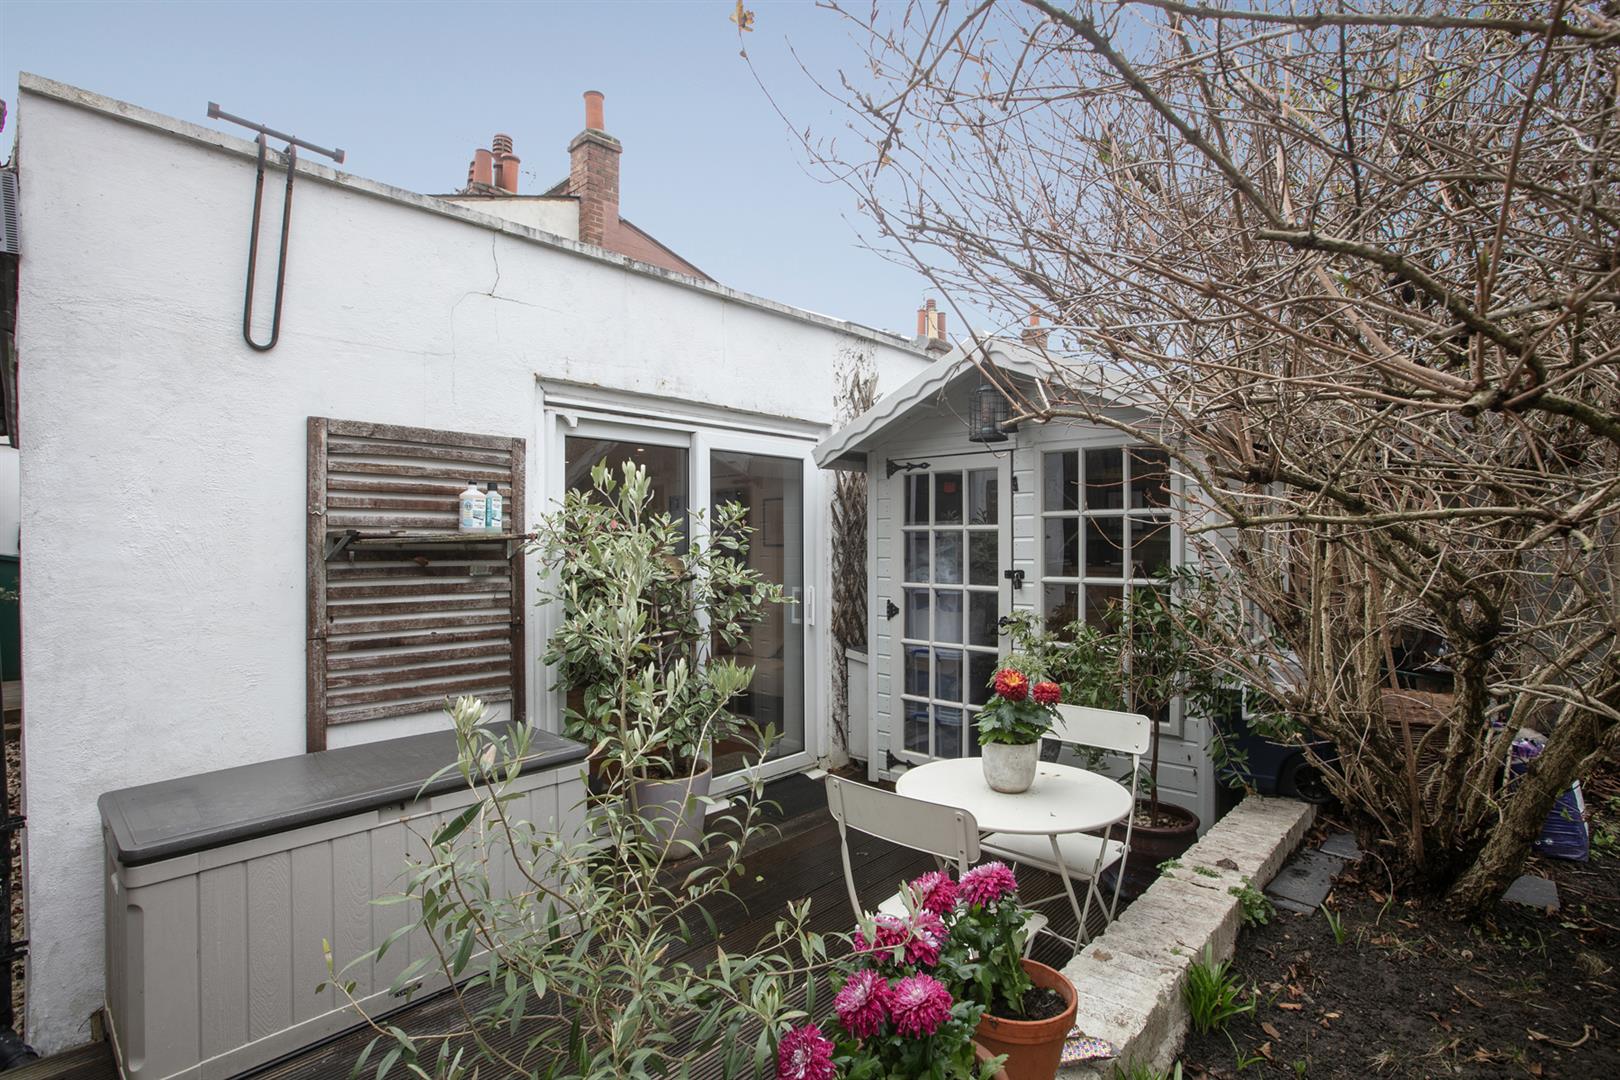 Flat - Conversion For Sale in Consort Road, Nunhead, SE15 1183 view22